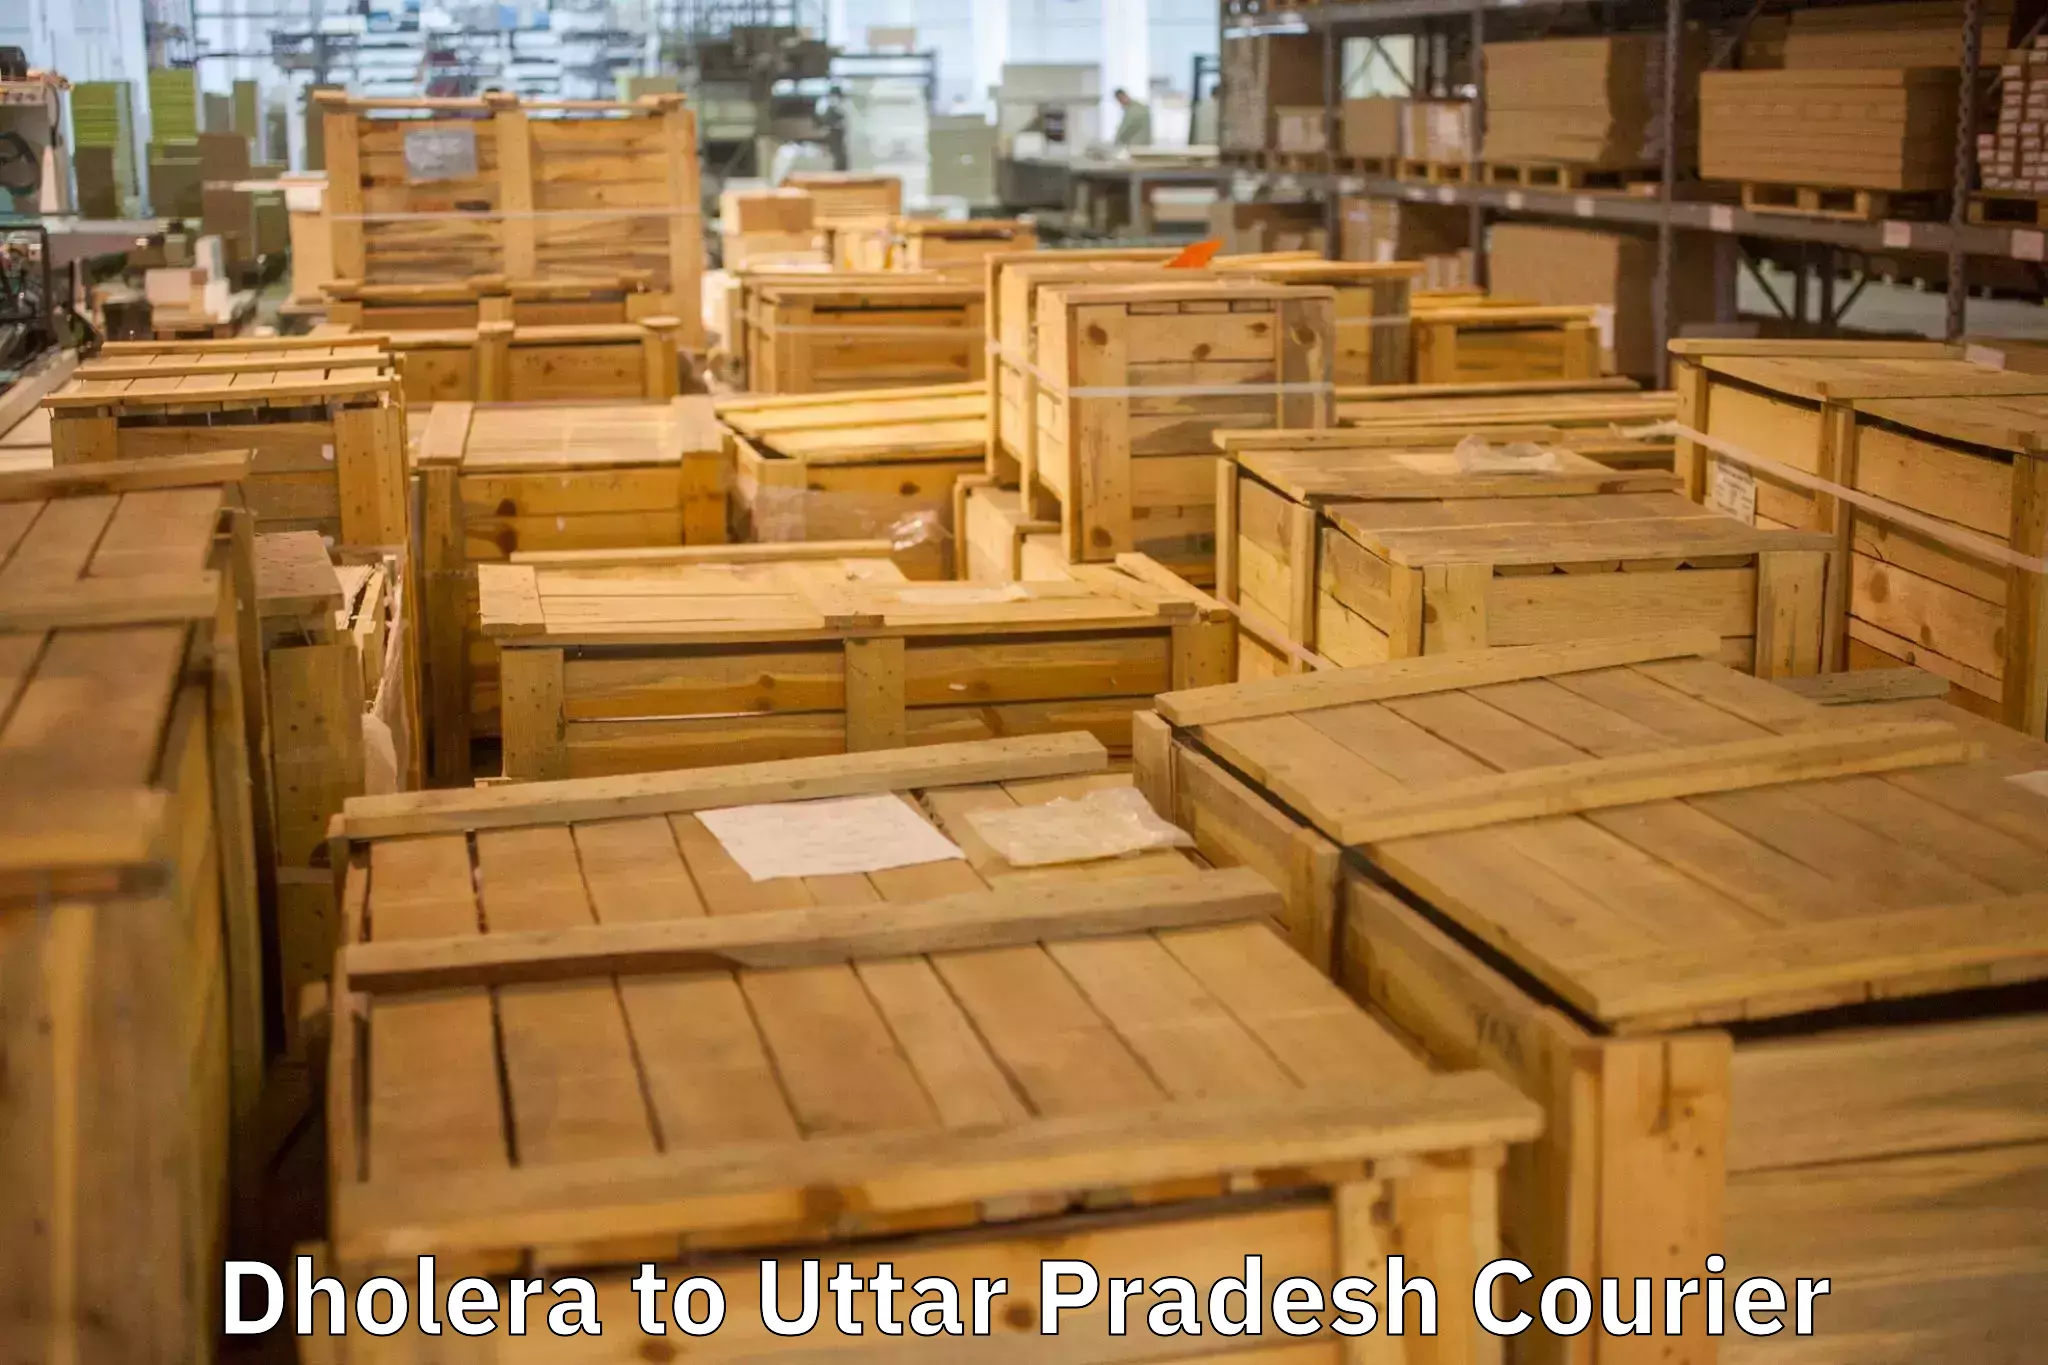 Trusted relocation experts Dholera to Firozabad